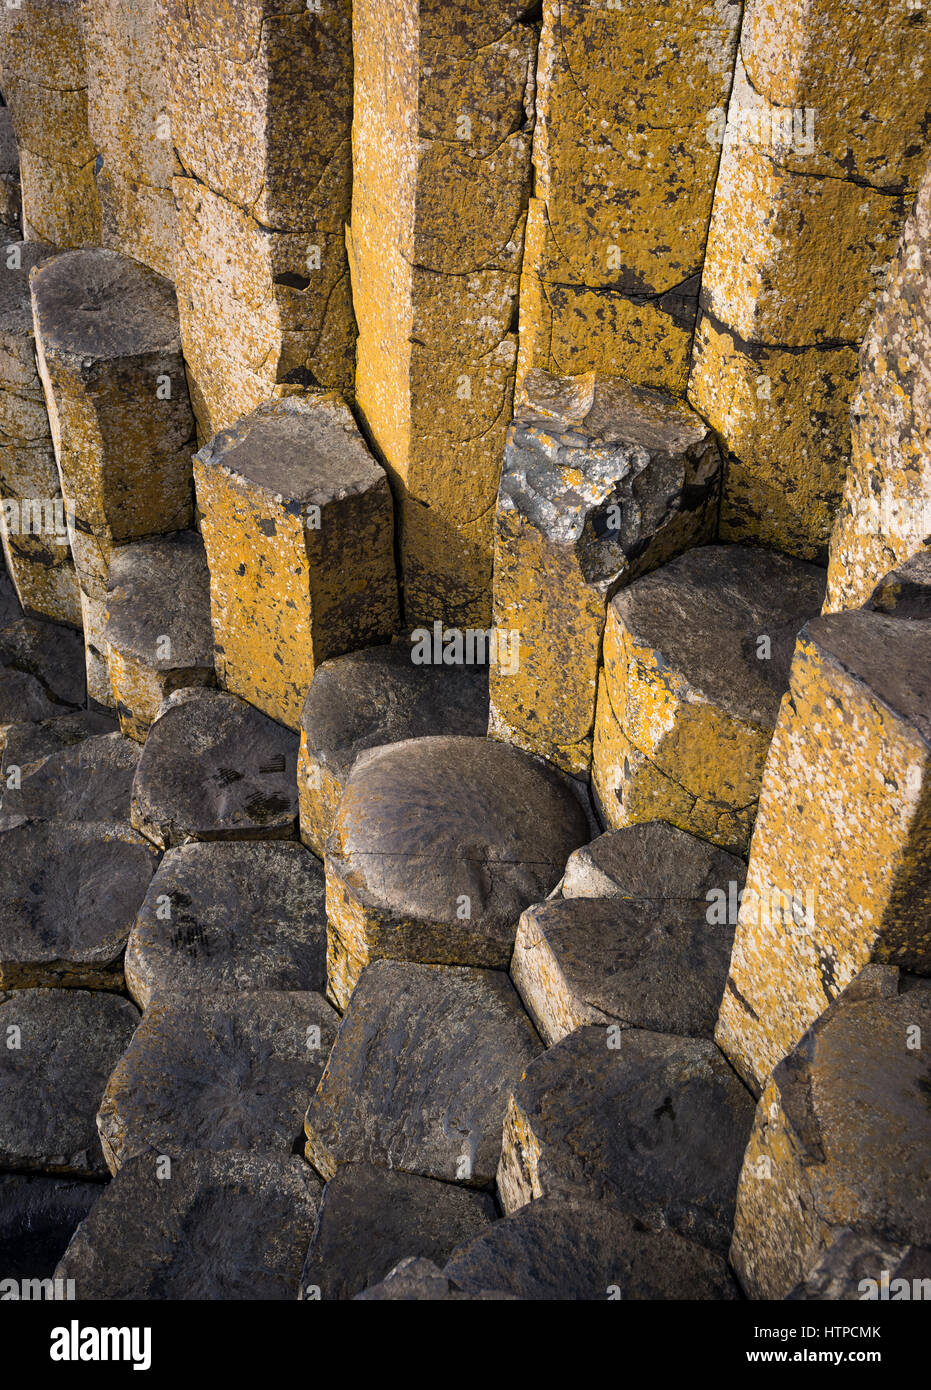 The world famous heritage site - The Giant's Causeway on Ireland's North Coast. Stock Photo